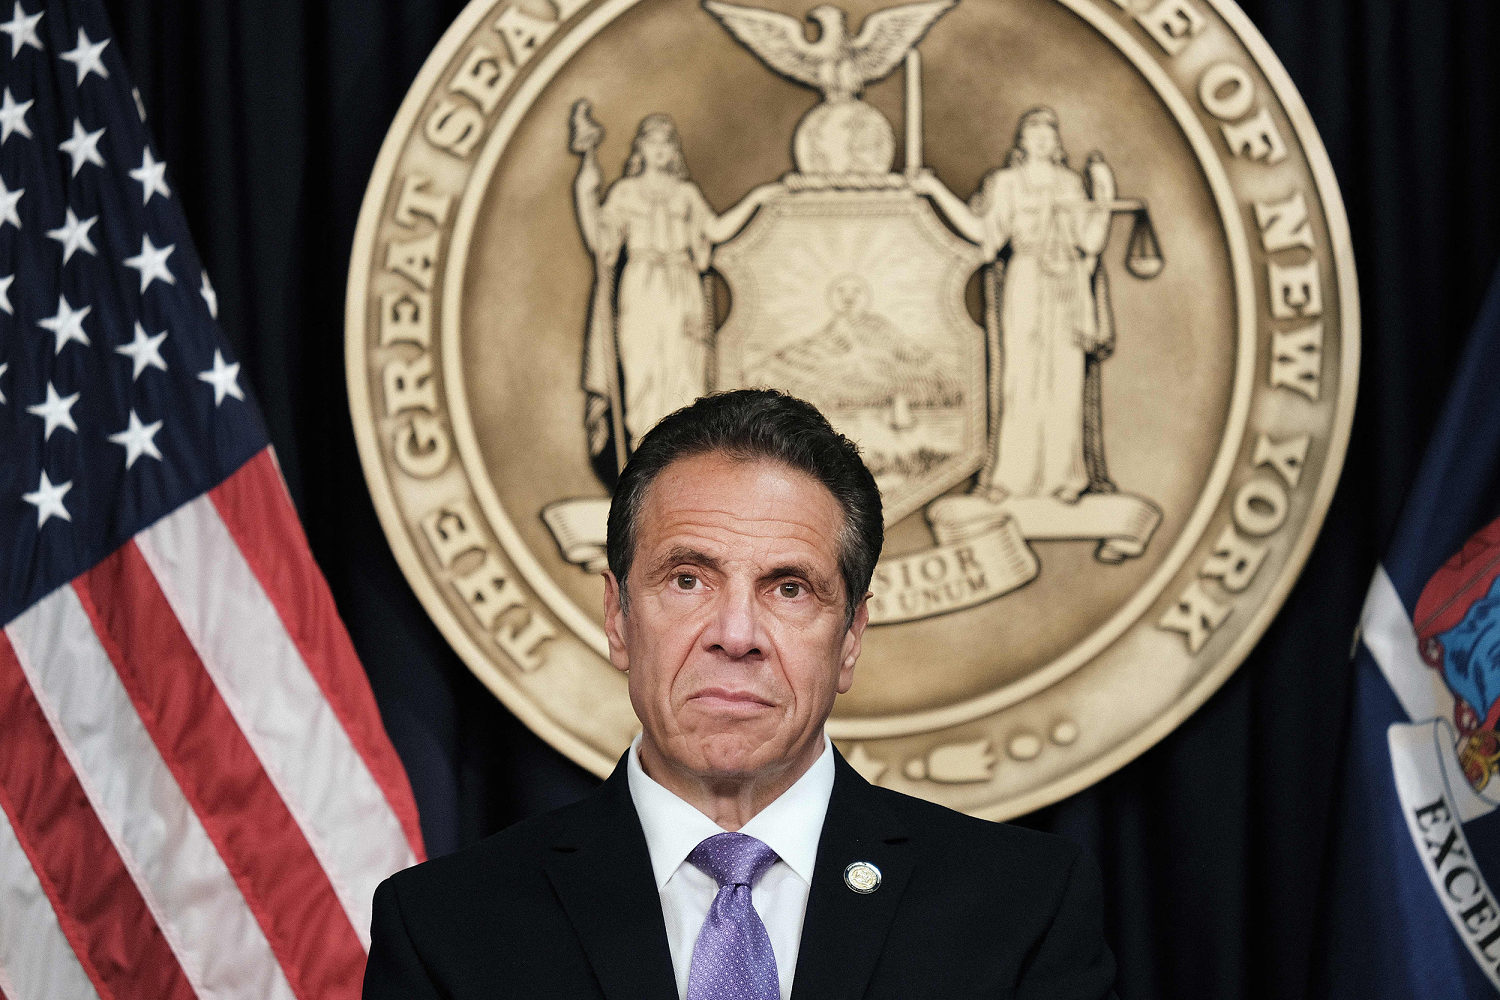 Andrew Cuomo sexually harassed staffers and underlings retaliated against accusers, DOJ says